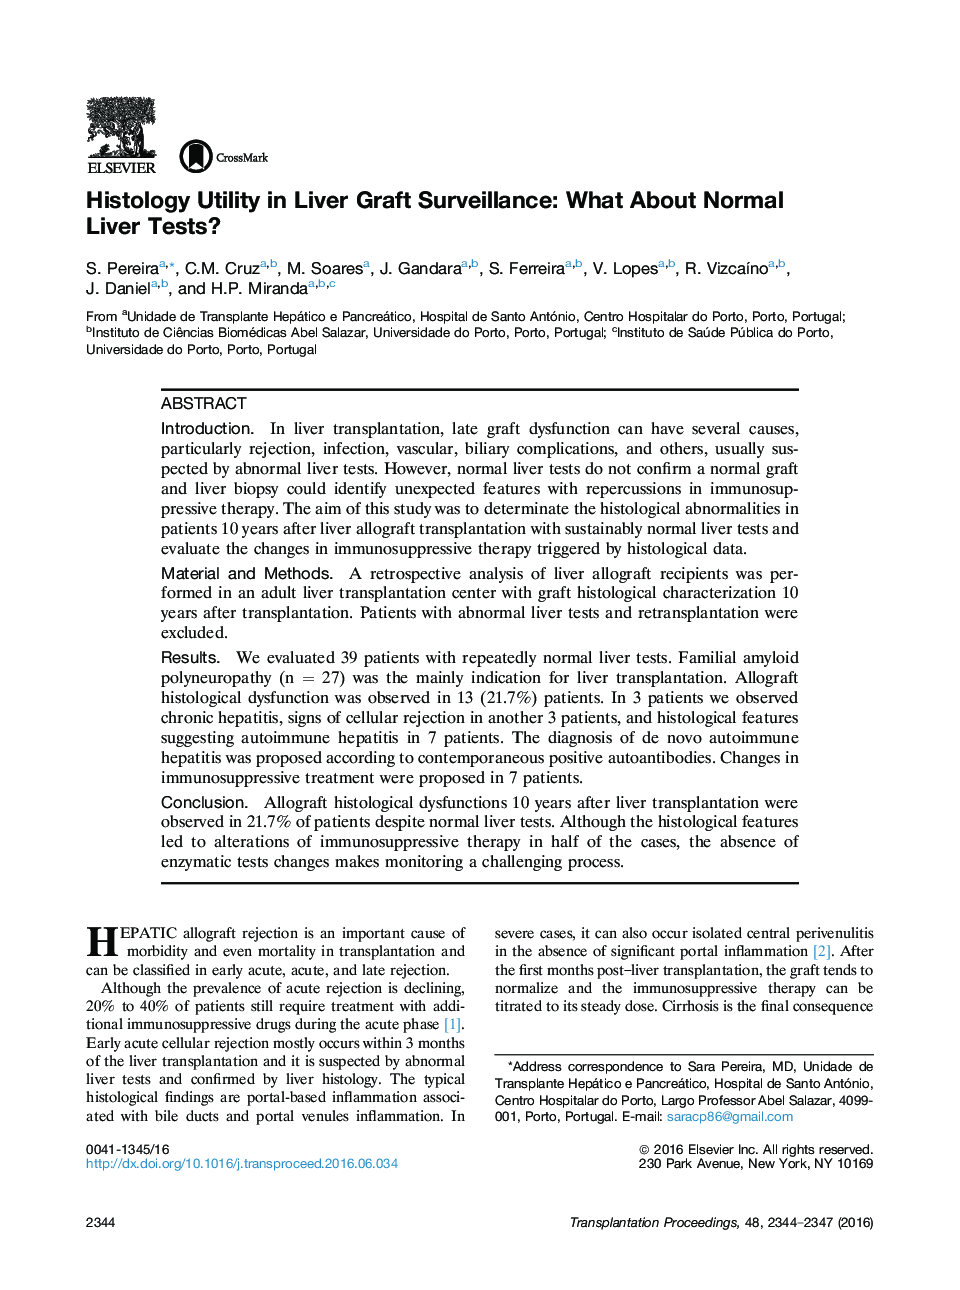 14th Congress of the Brazilian Transplantation Society and the 14th Congress of the Luso-Brazilian Transplantation SocietyLiver transplantationHistology Utility in Liver Graft Surveillance: What About Normal Liver Tests?